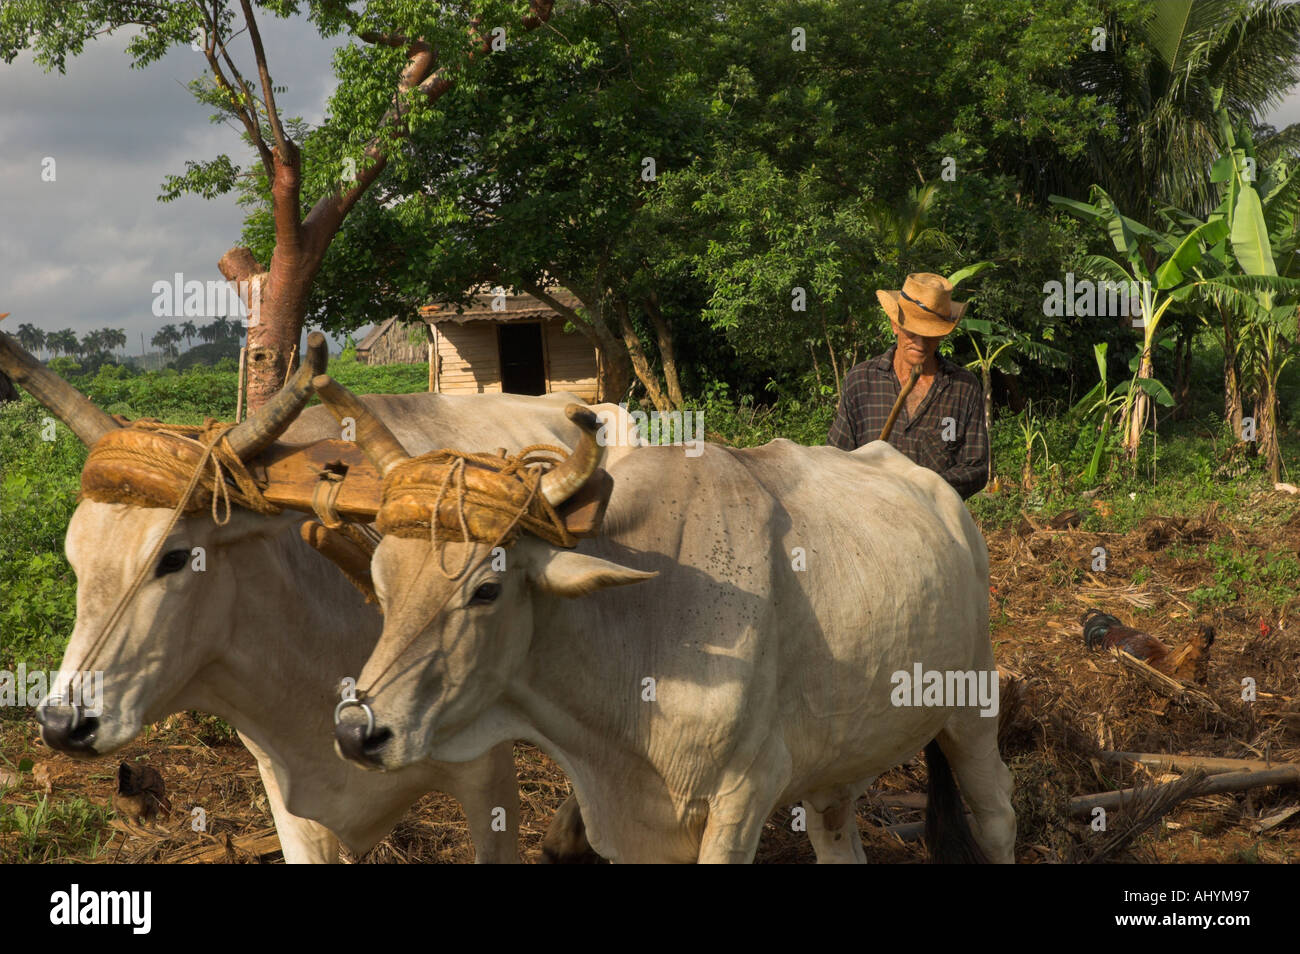 Cuba Pinar del Rio province Viniales close up of two oxen and peasant ploughing field Stock Photo